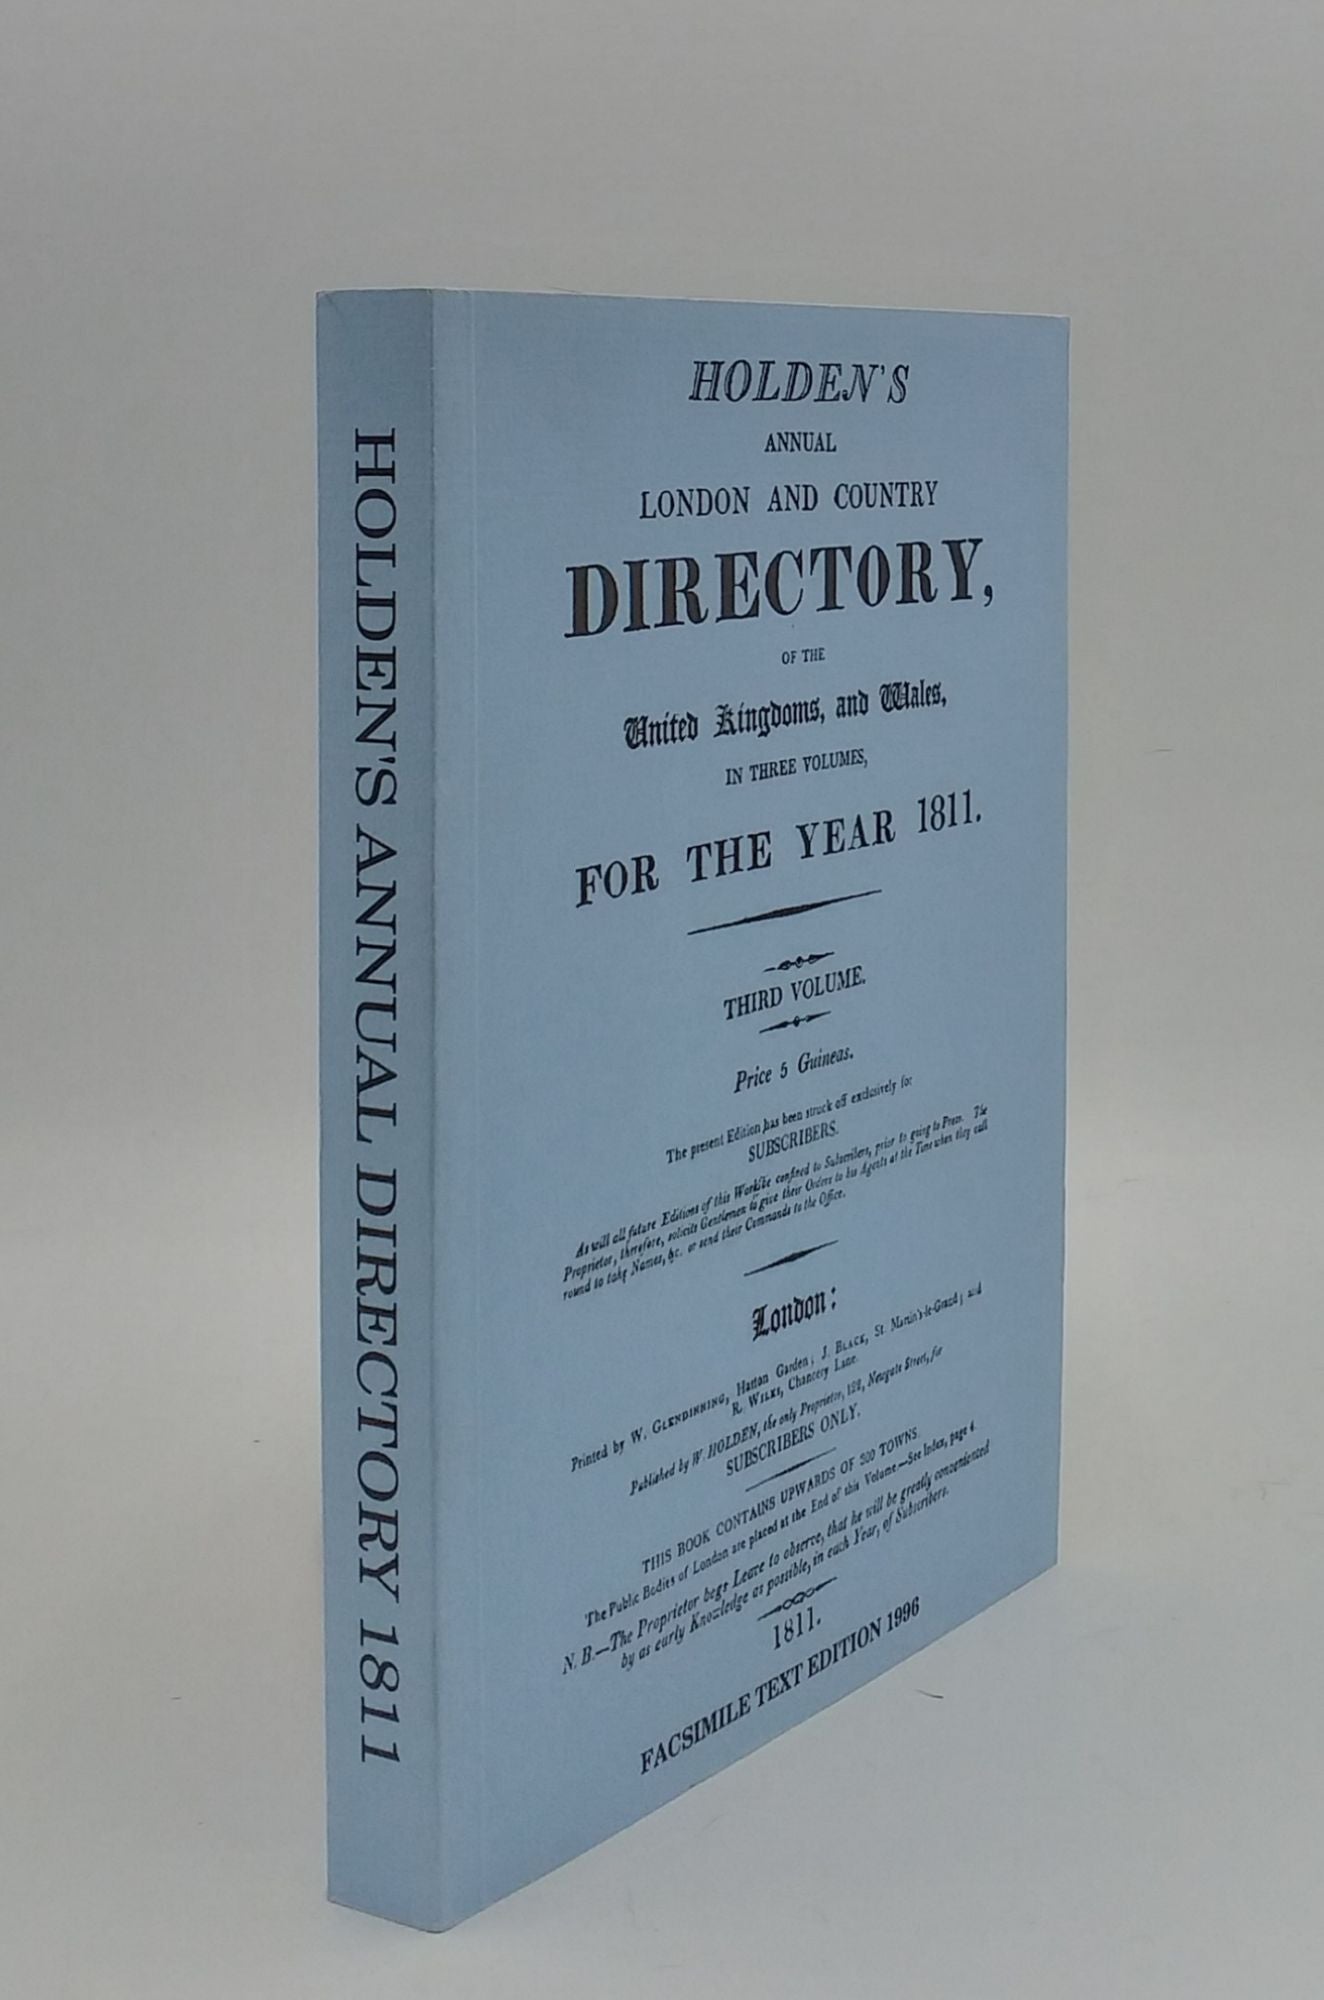 W. Holden - Holden's Annual London and Country Directory for the Year 1811 Volume 3